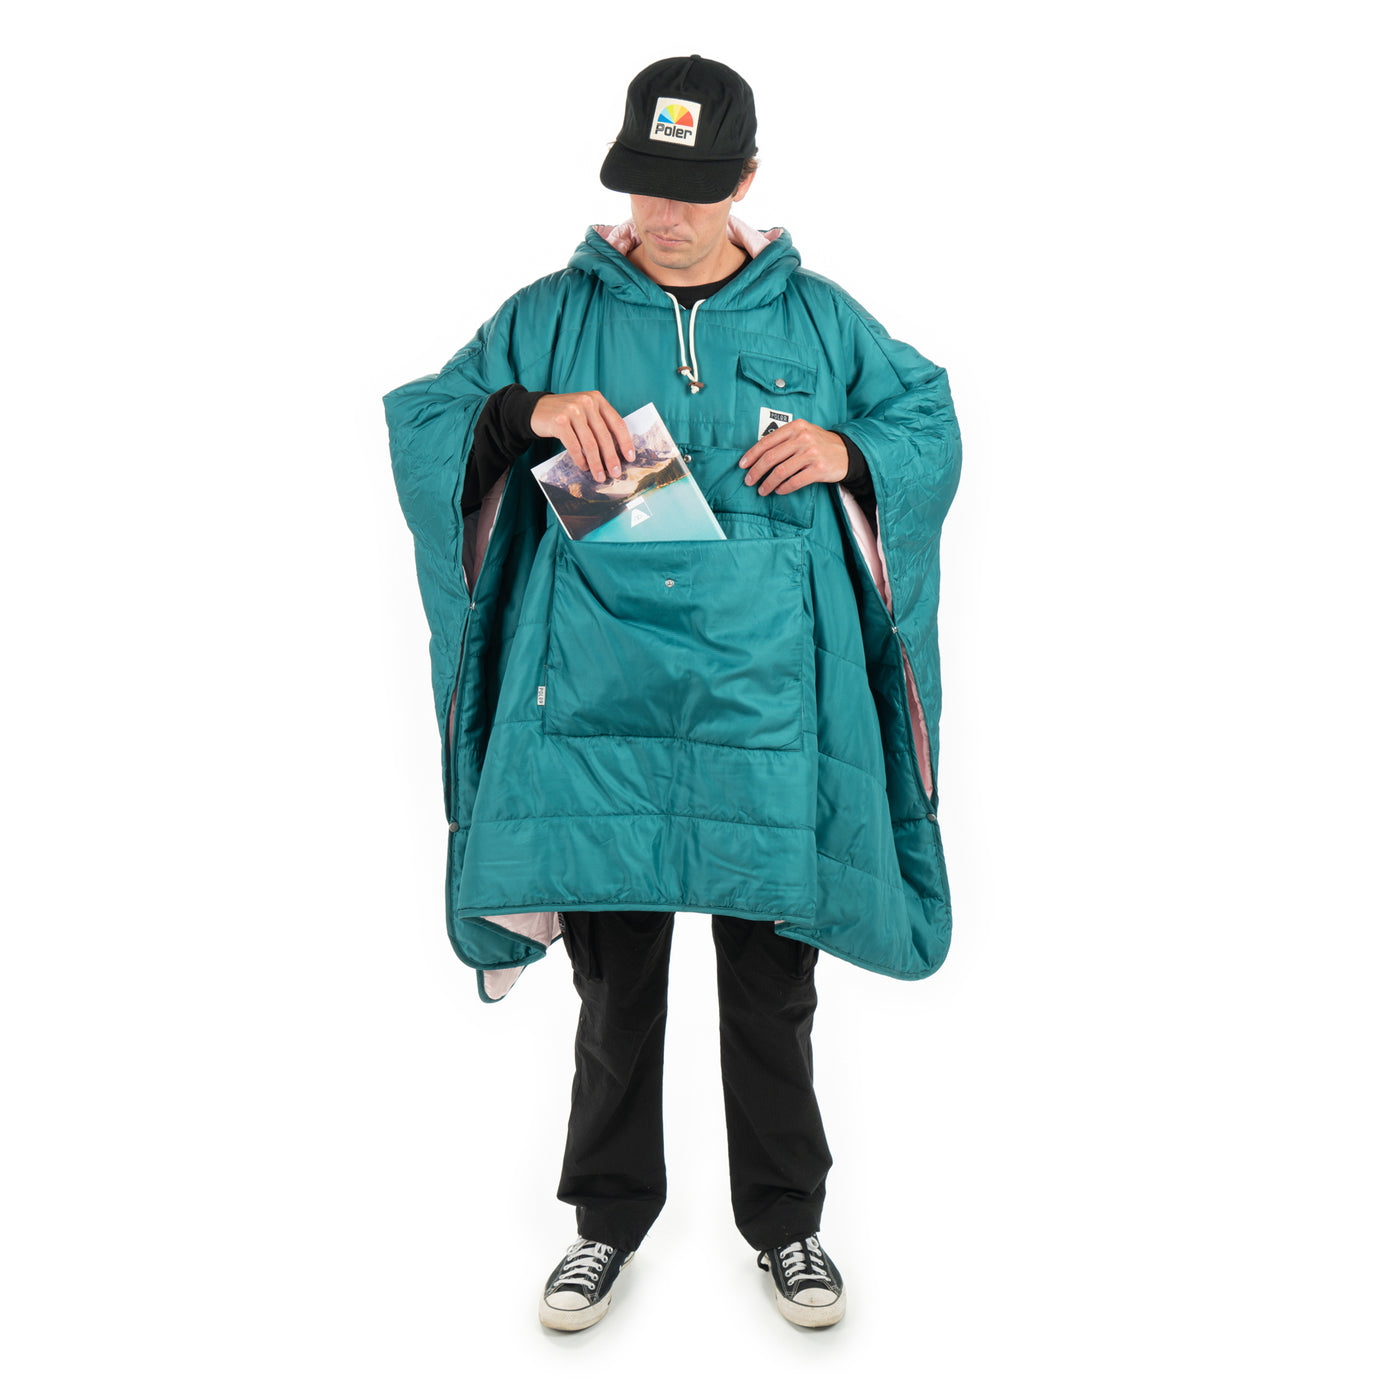 Poncho - Gumball product   